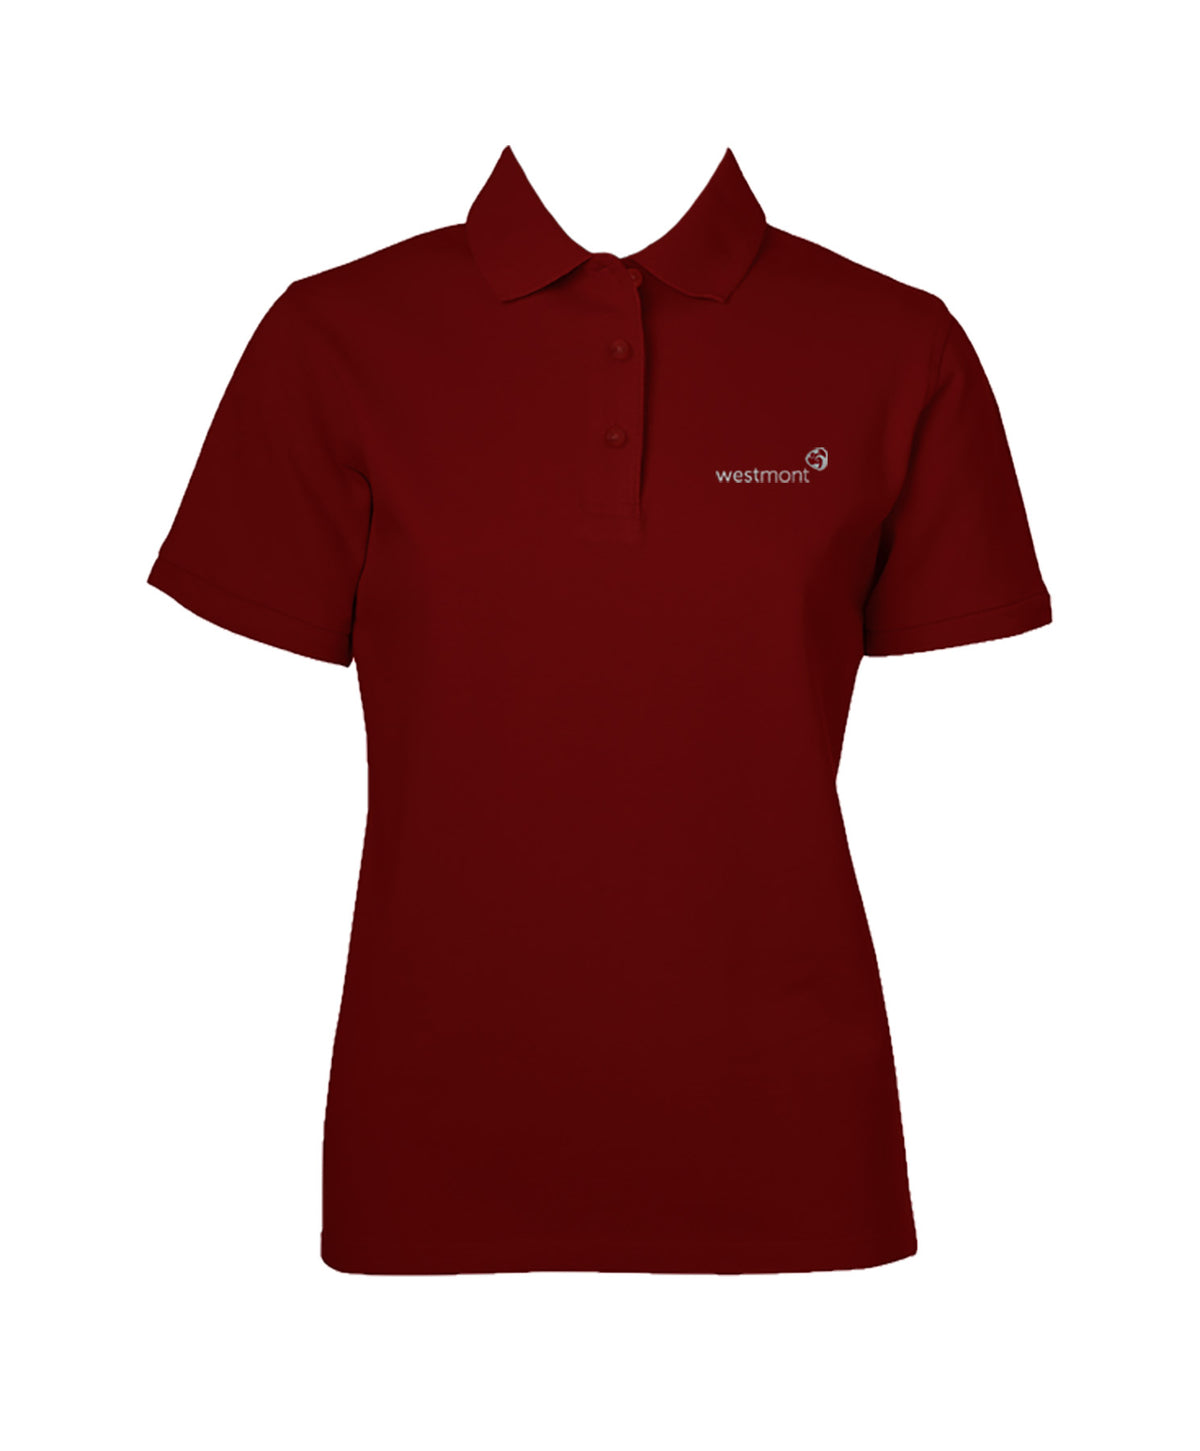 ***WESTMONT RUBY RED GOLF SHIRT, GIRLS, SHORT SLEEVE, YOUTH